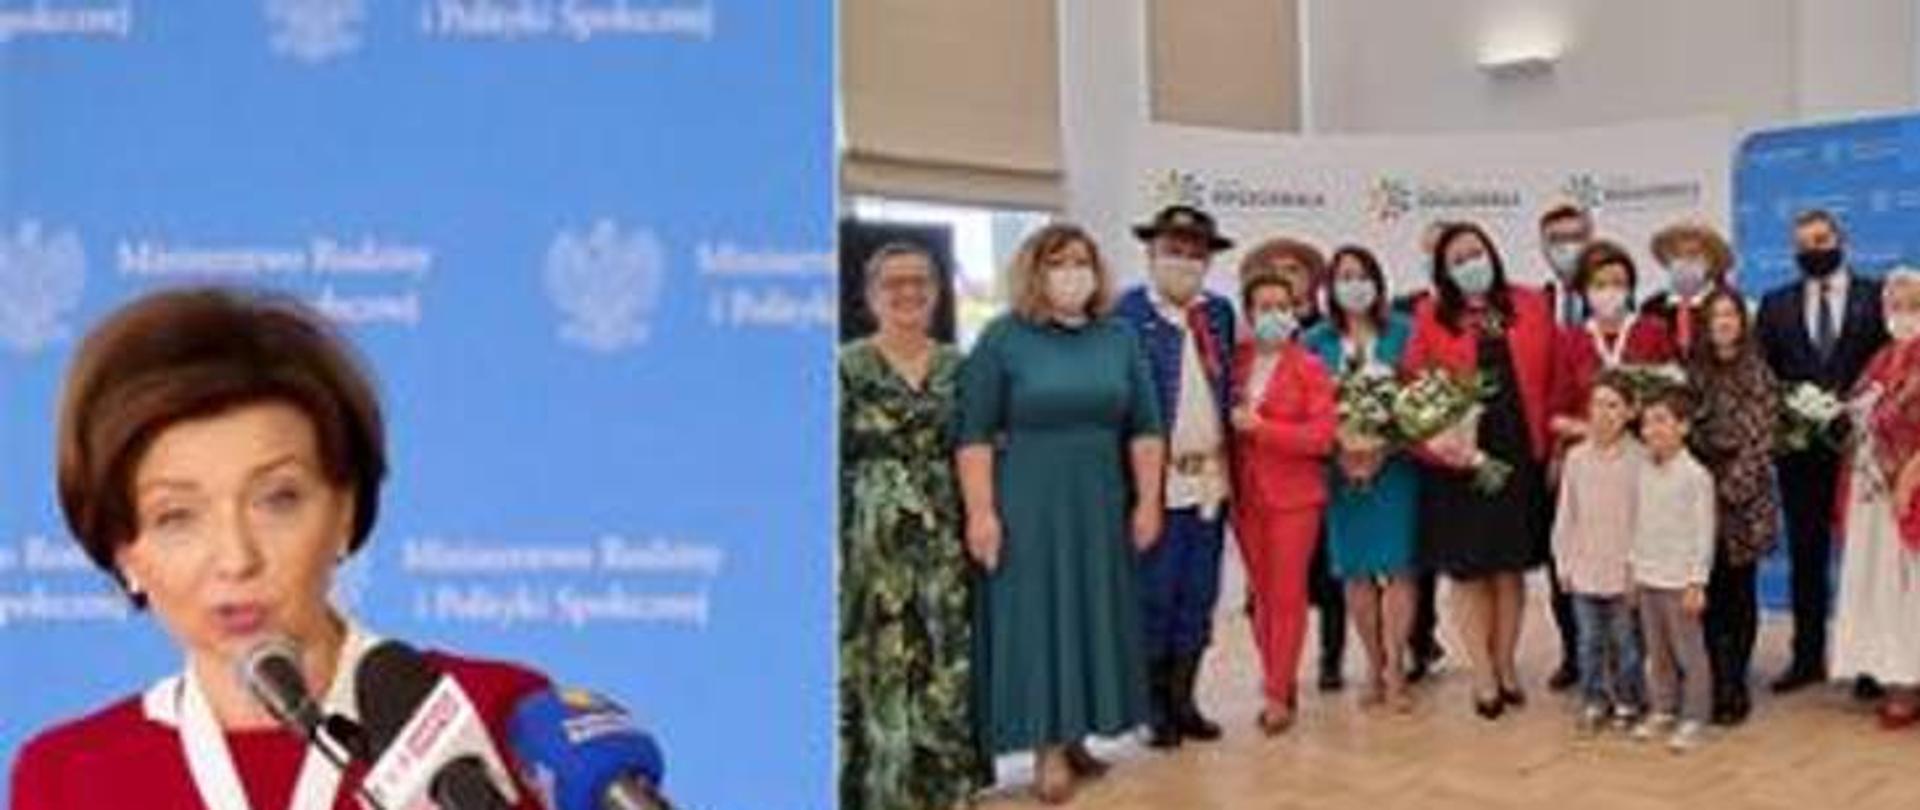 Inauguration of the activities of the Centre for Social Development in Boguchwała